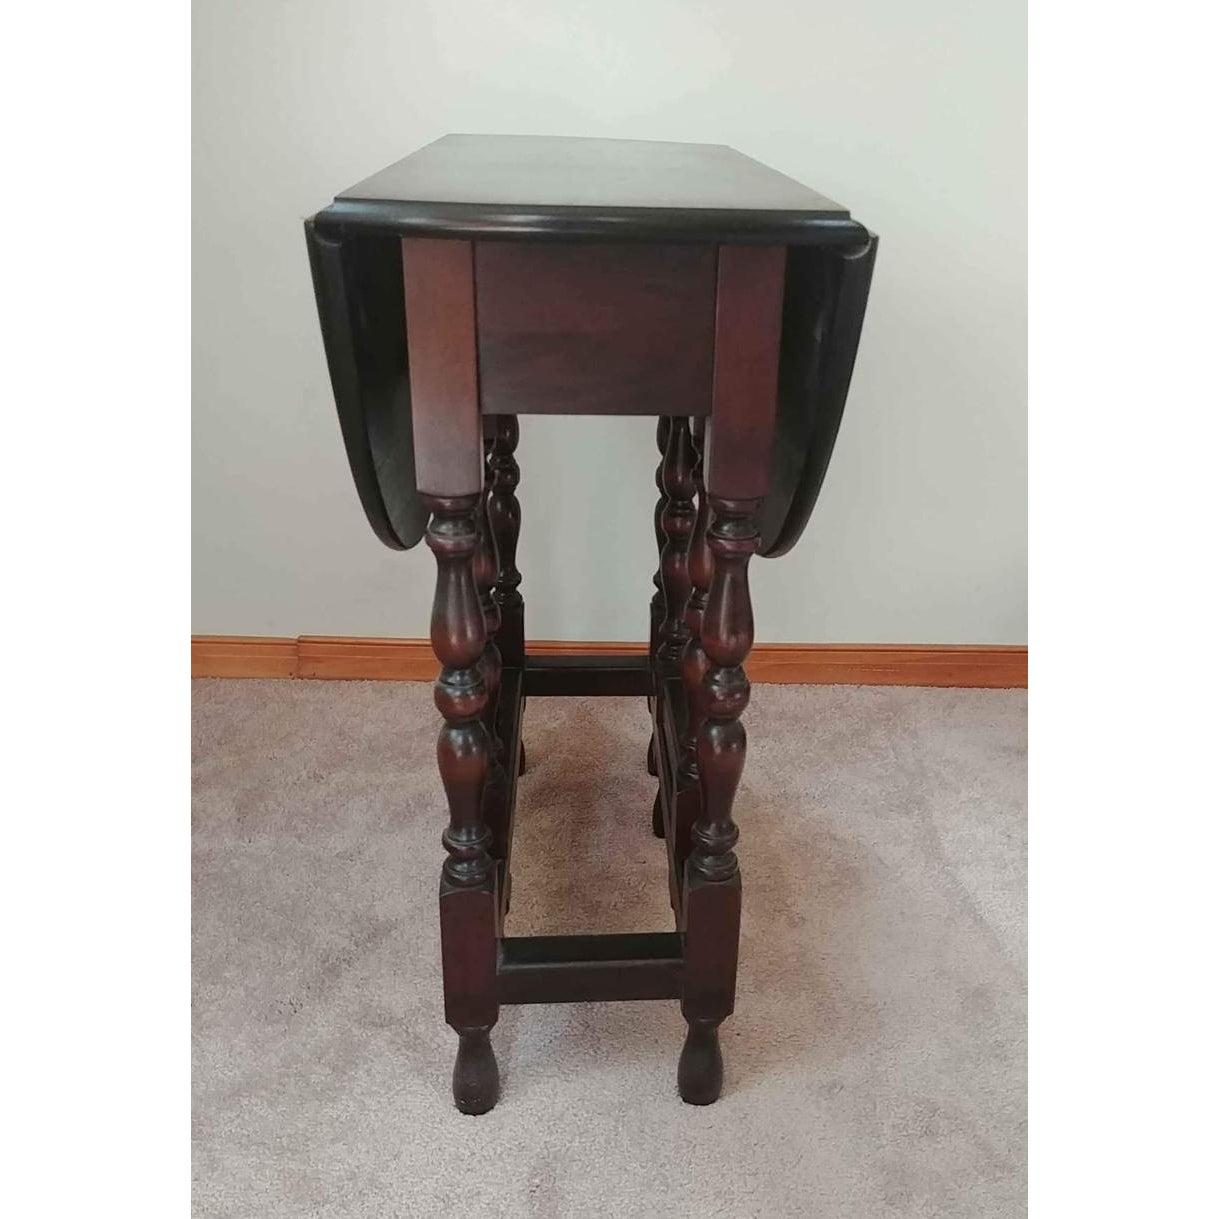 Vintage 1940s Solid Mahogany Drop-Leaf Gateleg Accent Table In Good Condition For Sale In Germantown, MD